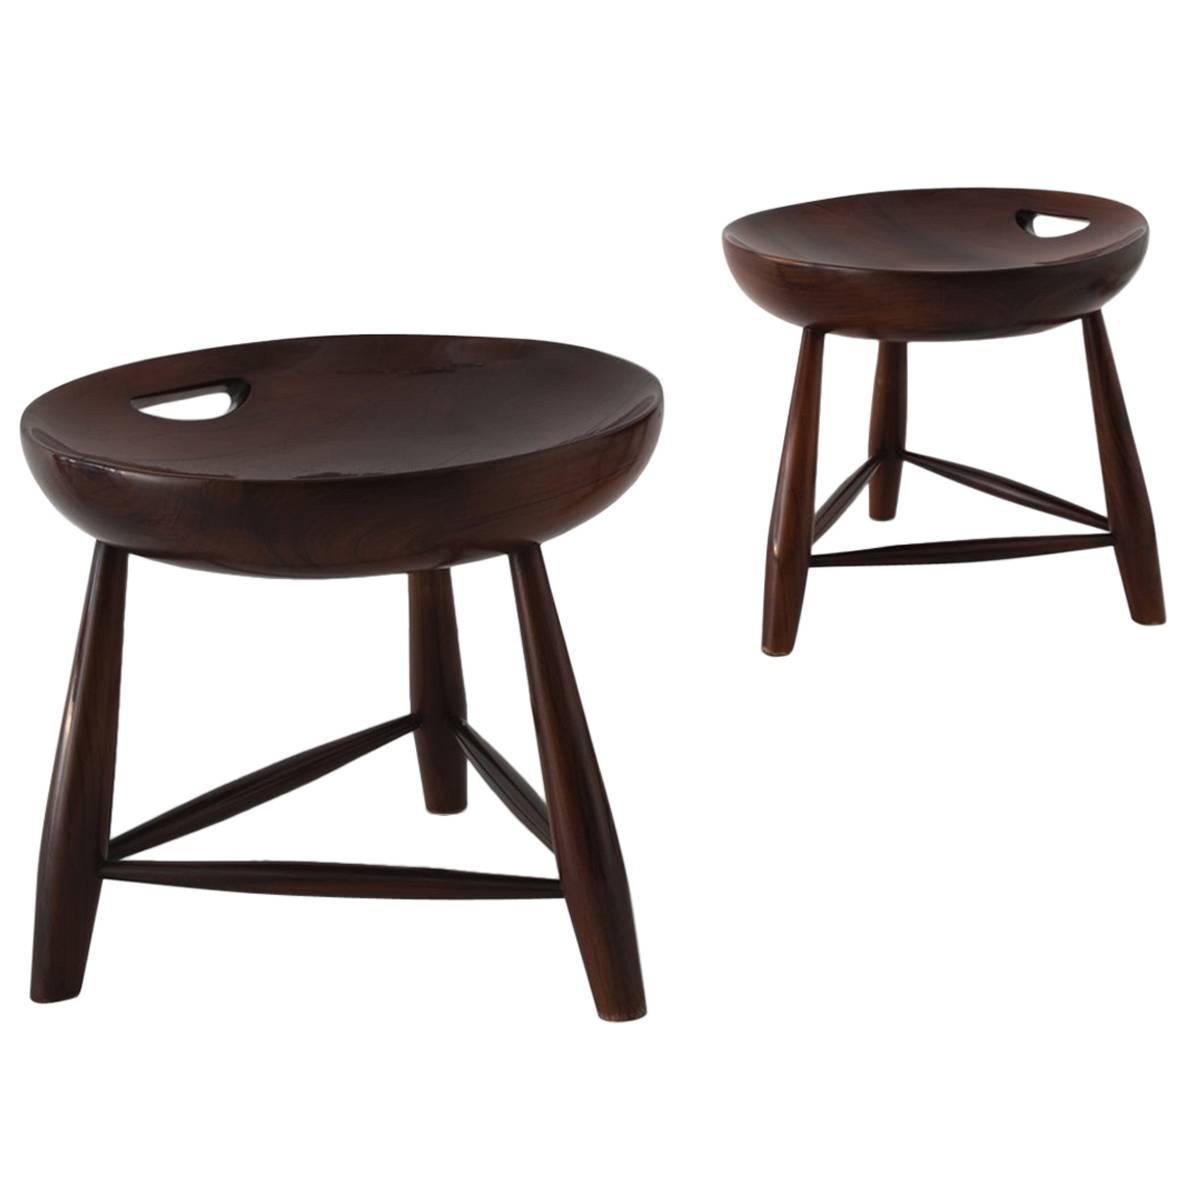 Sergio Rodrigues Pair of "Mocho" Stools, Manufactured by Oca, Brazil, 1954